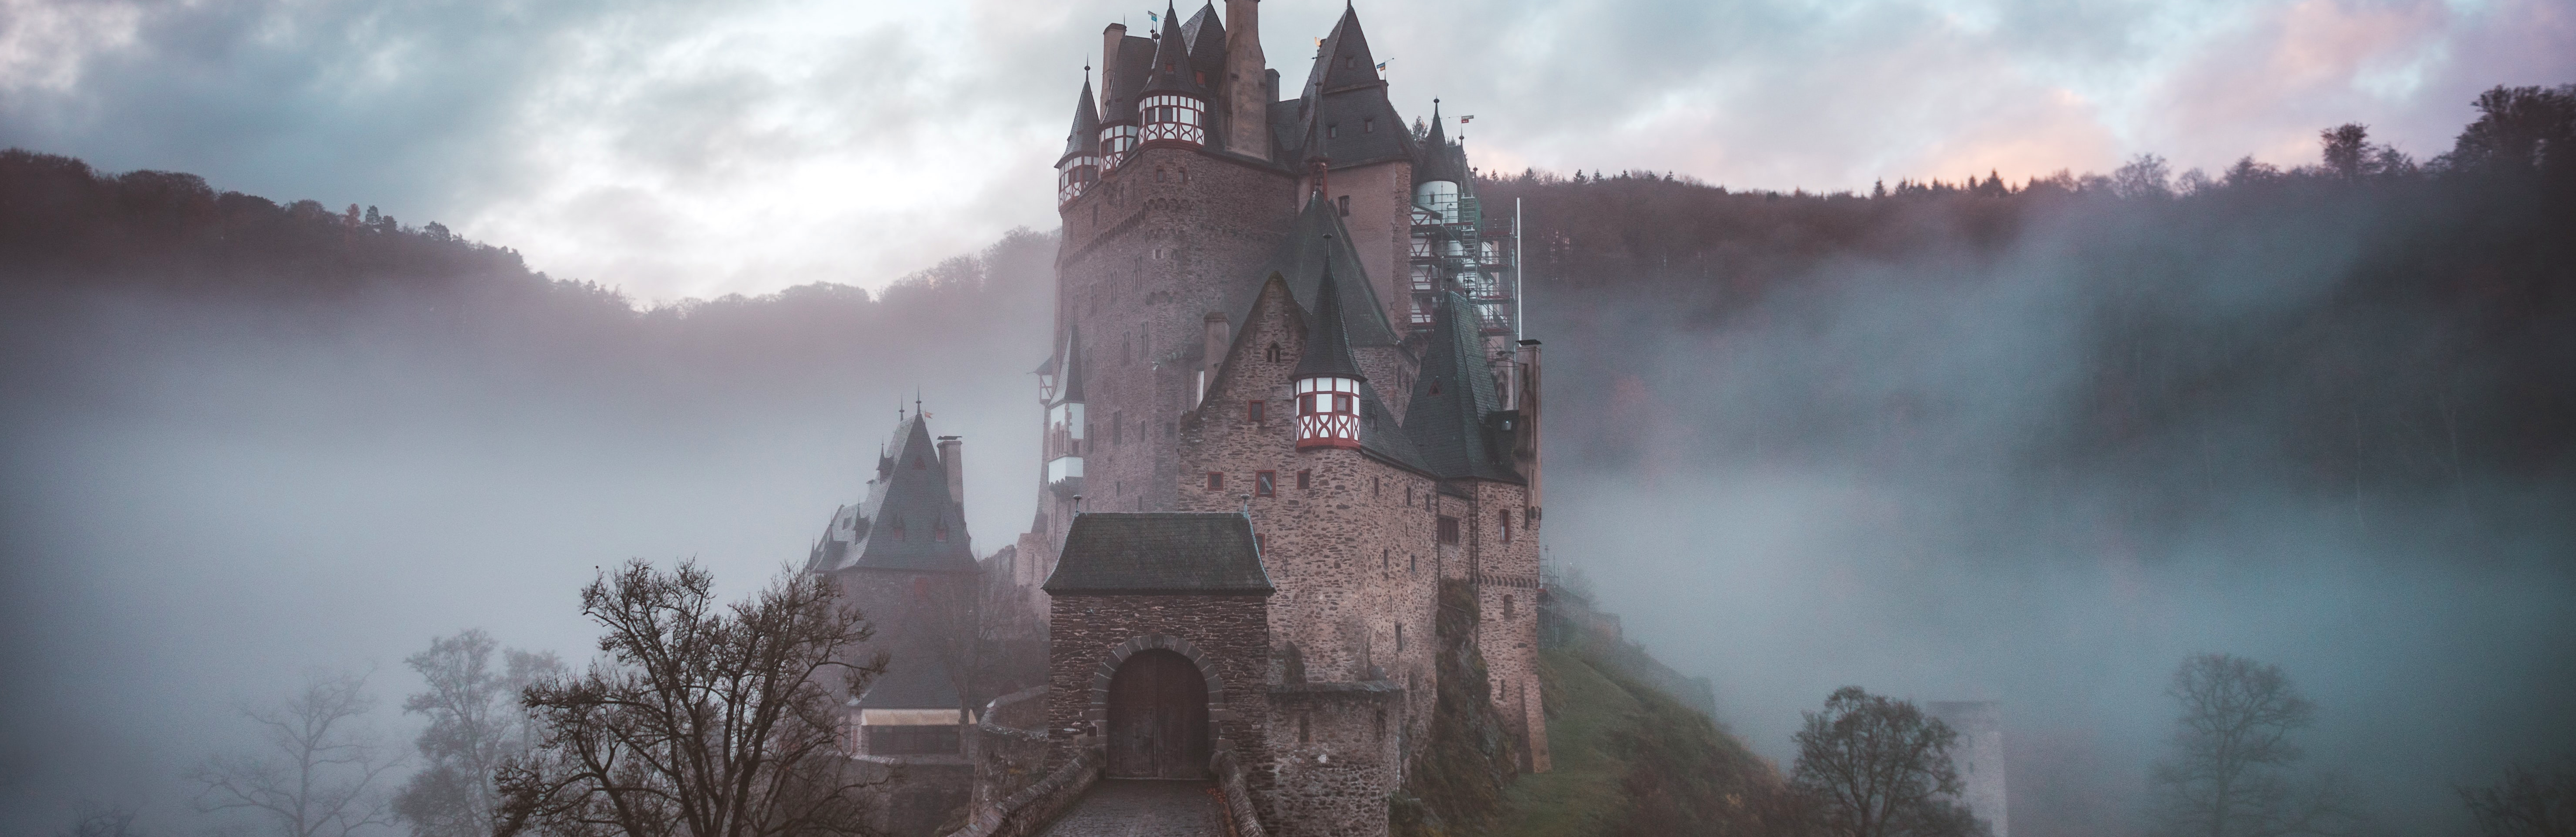 Photo of a castle surrounded by fog